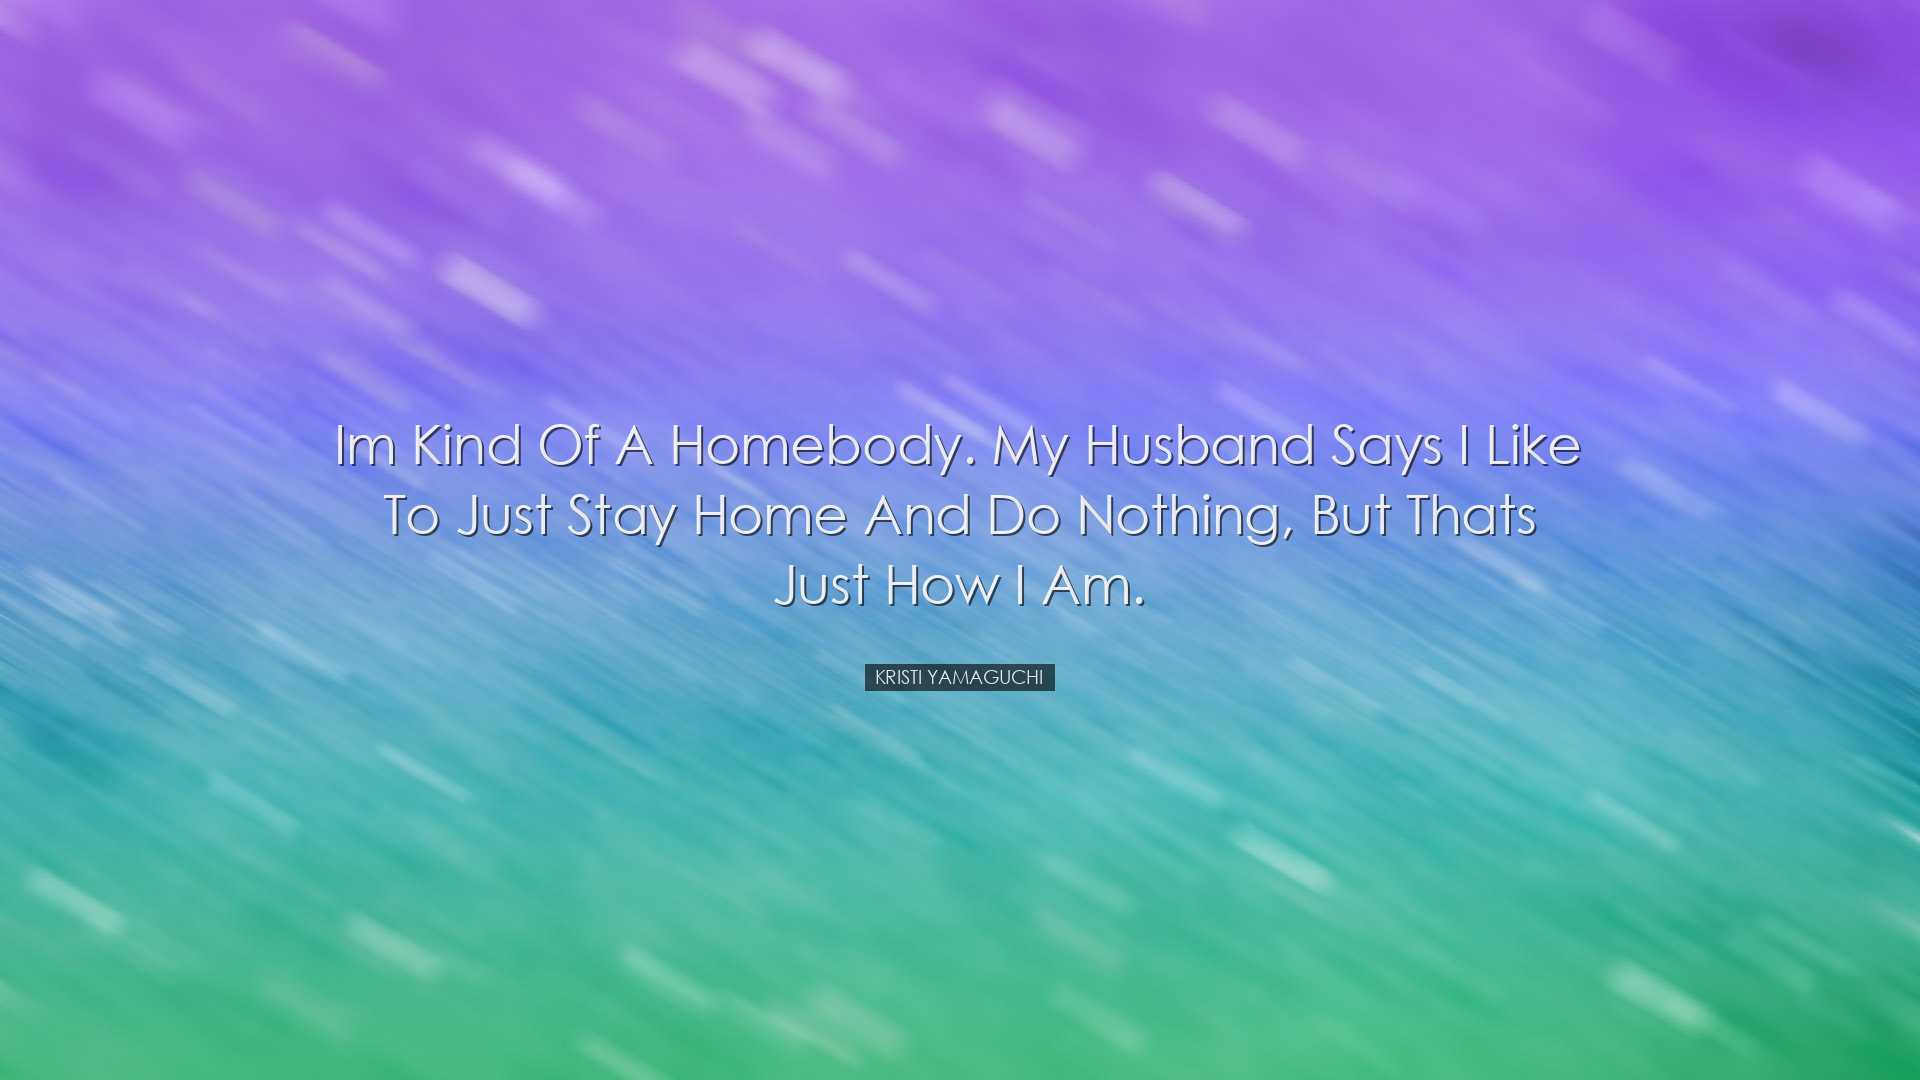 Im kind of a homebody. My husband says I like to just stay home an